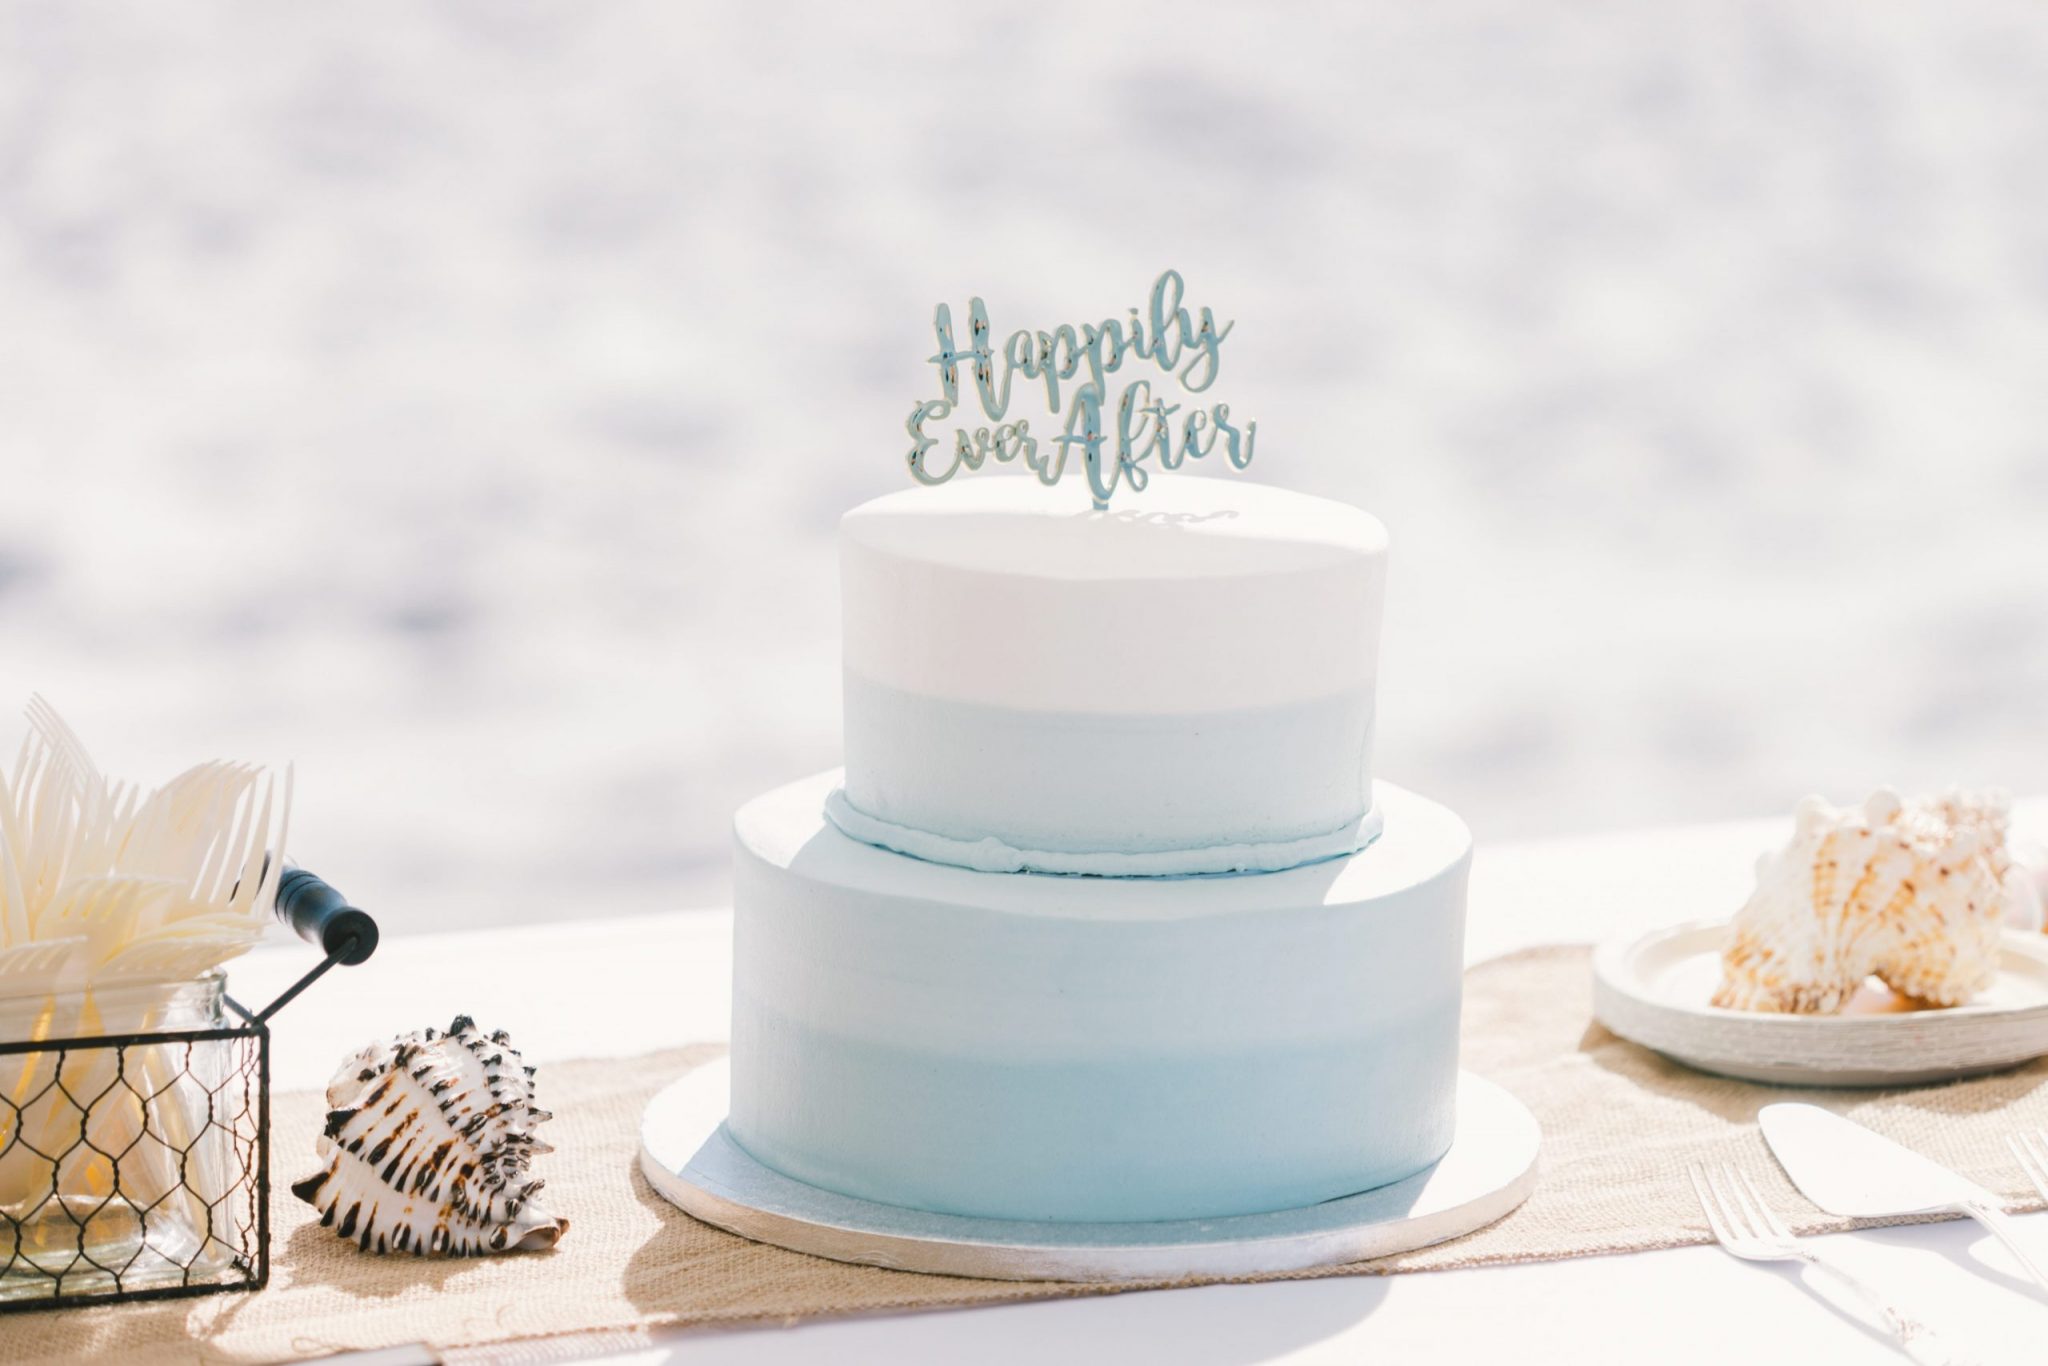 cake and decorations for a beach engagement party